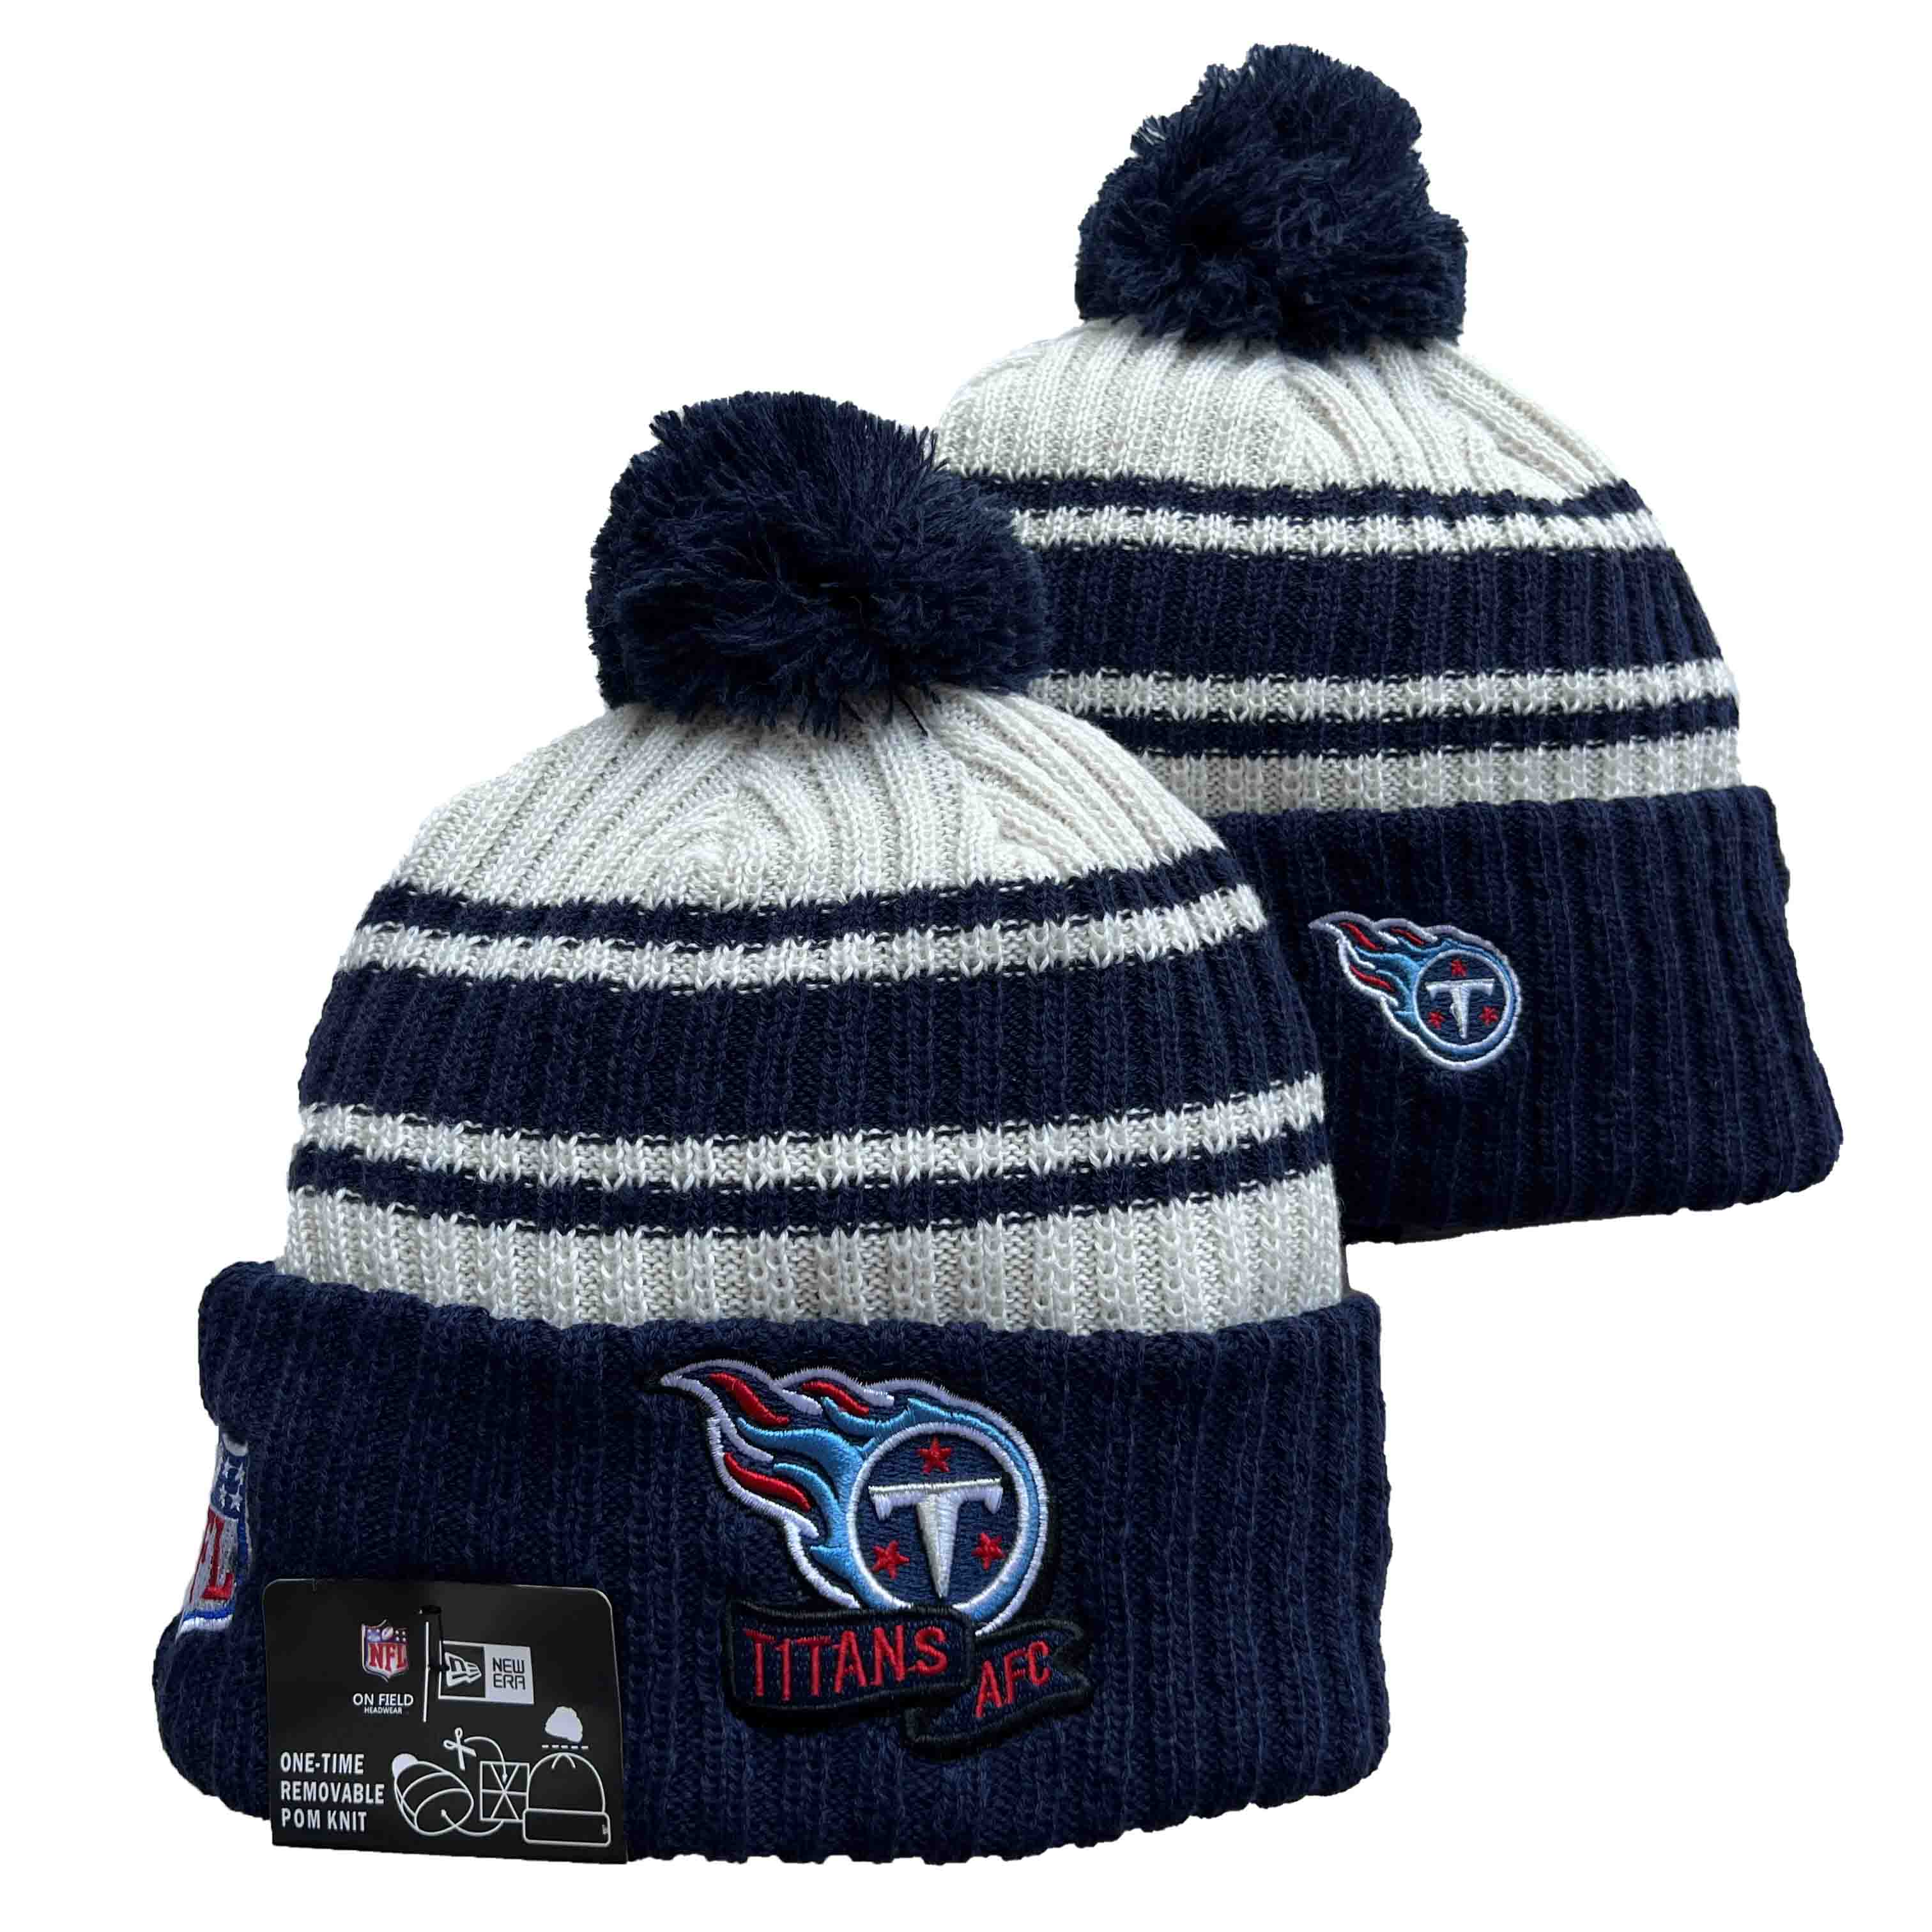 NFL Tennessee Titans Beanies Knit Hats-YD1314